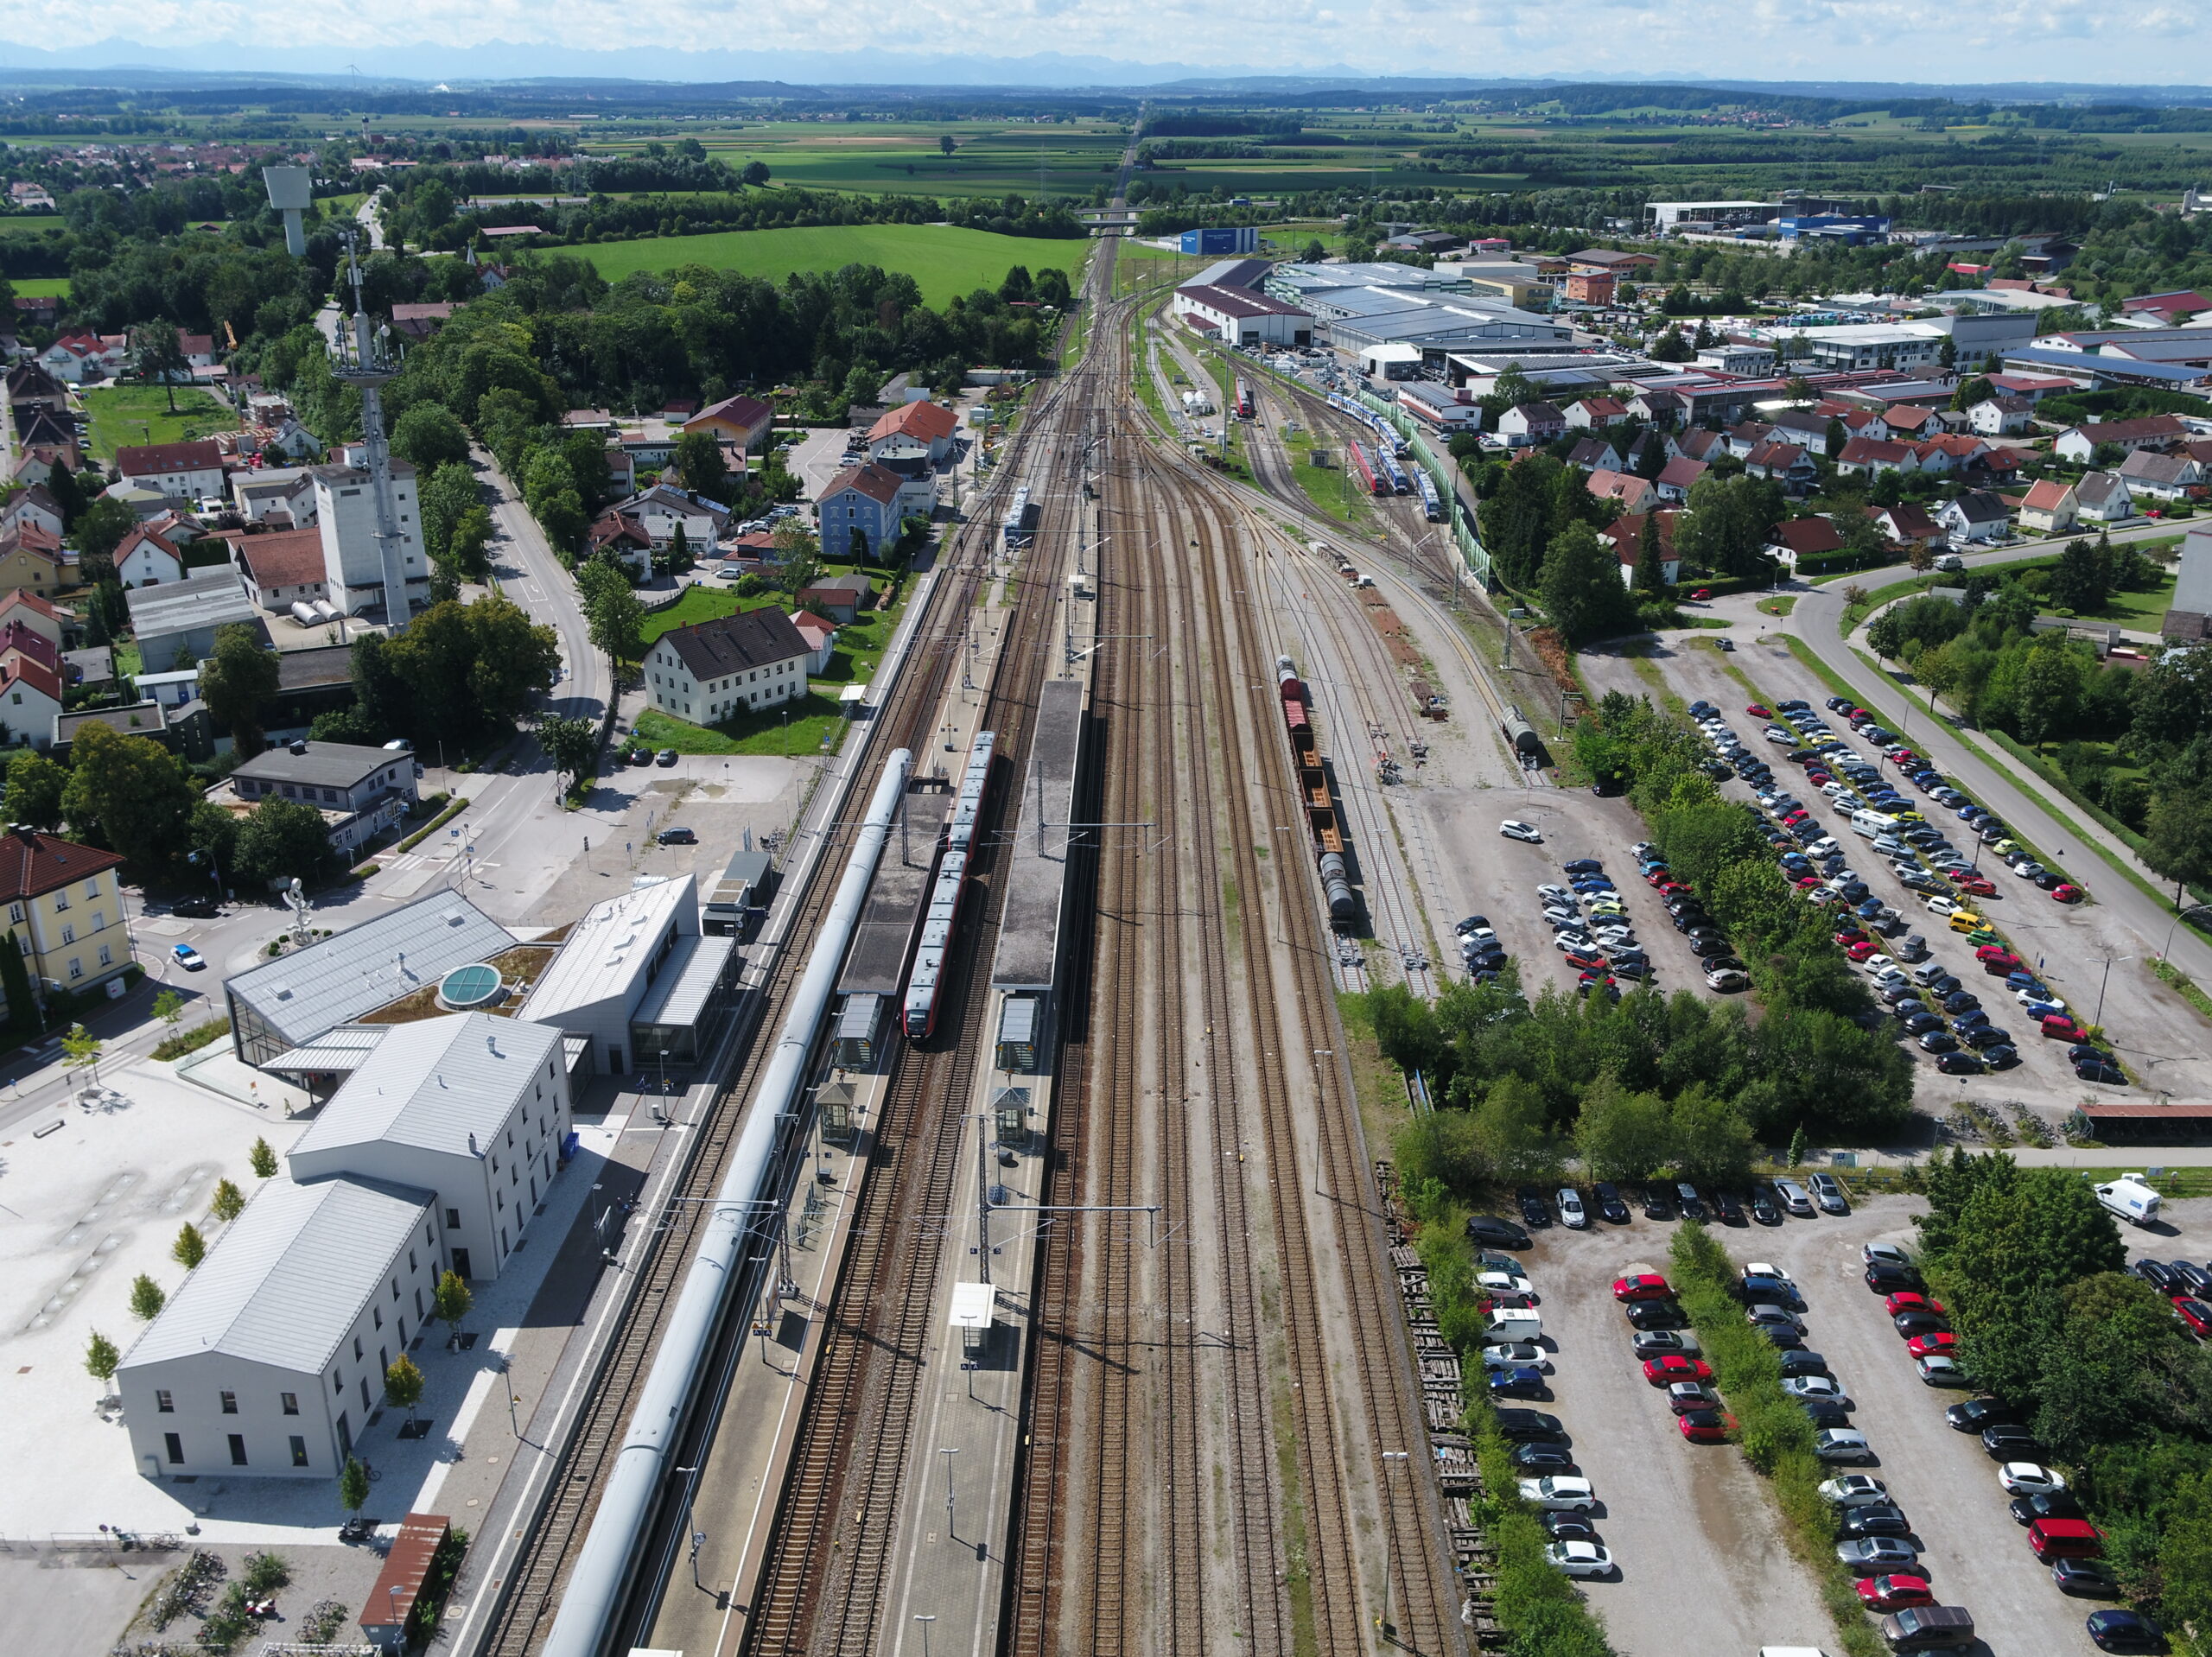 Rail Electrification - line upgrade 48 multicopter image 4 - central station Buchloe, Germany from above